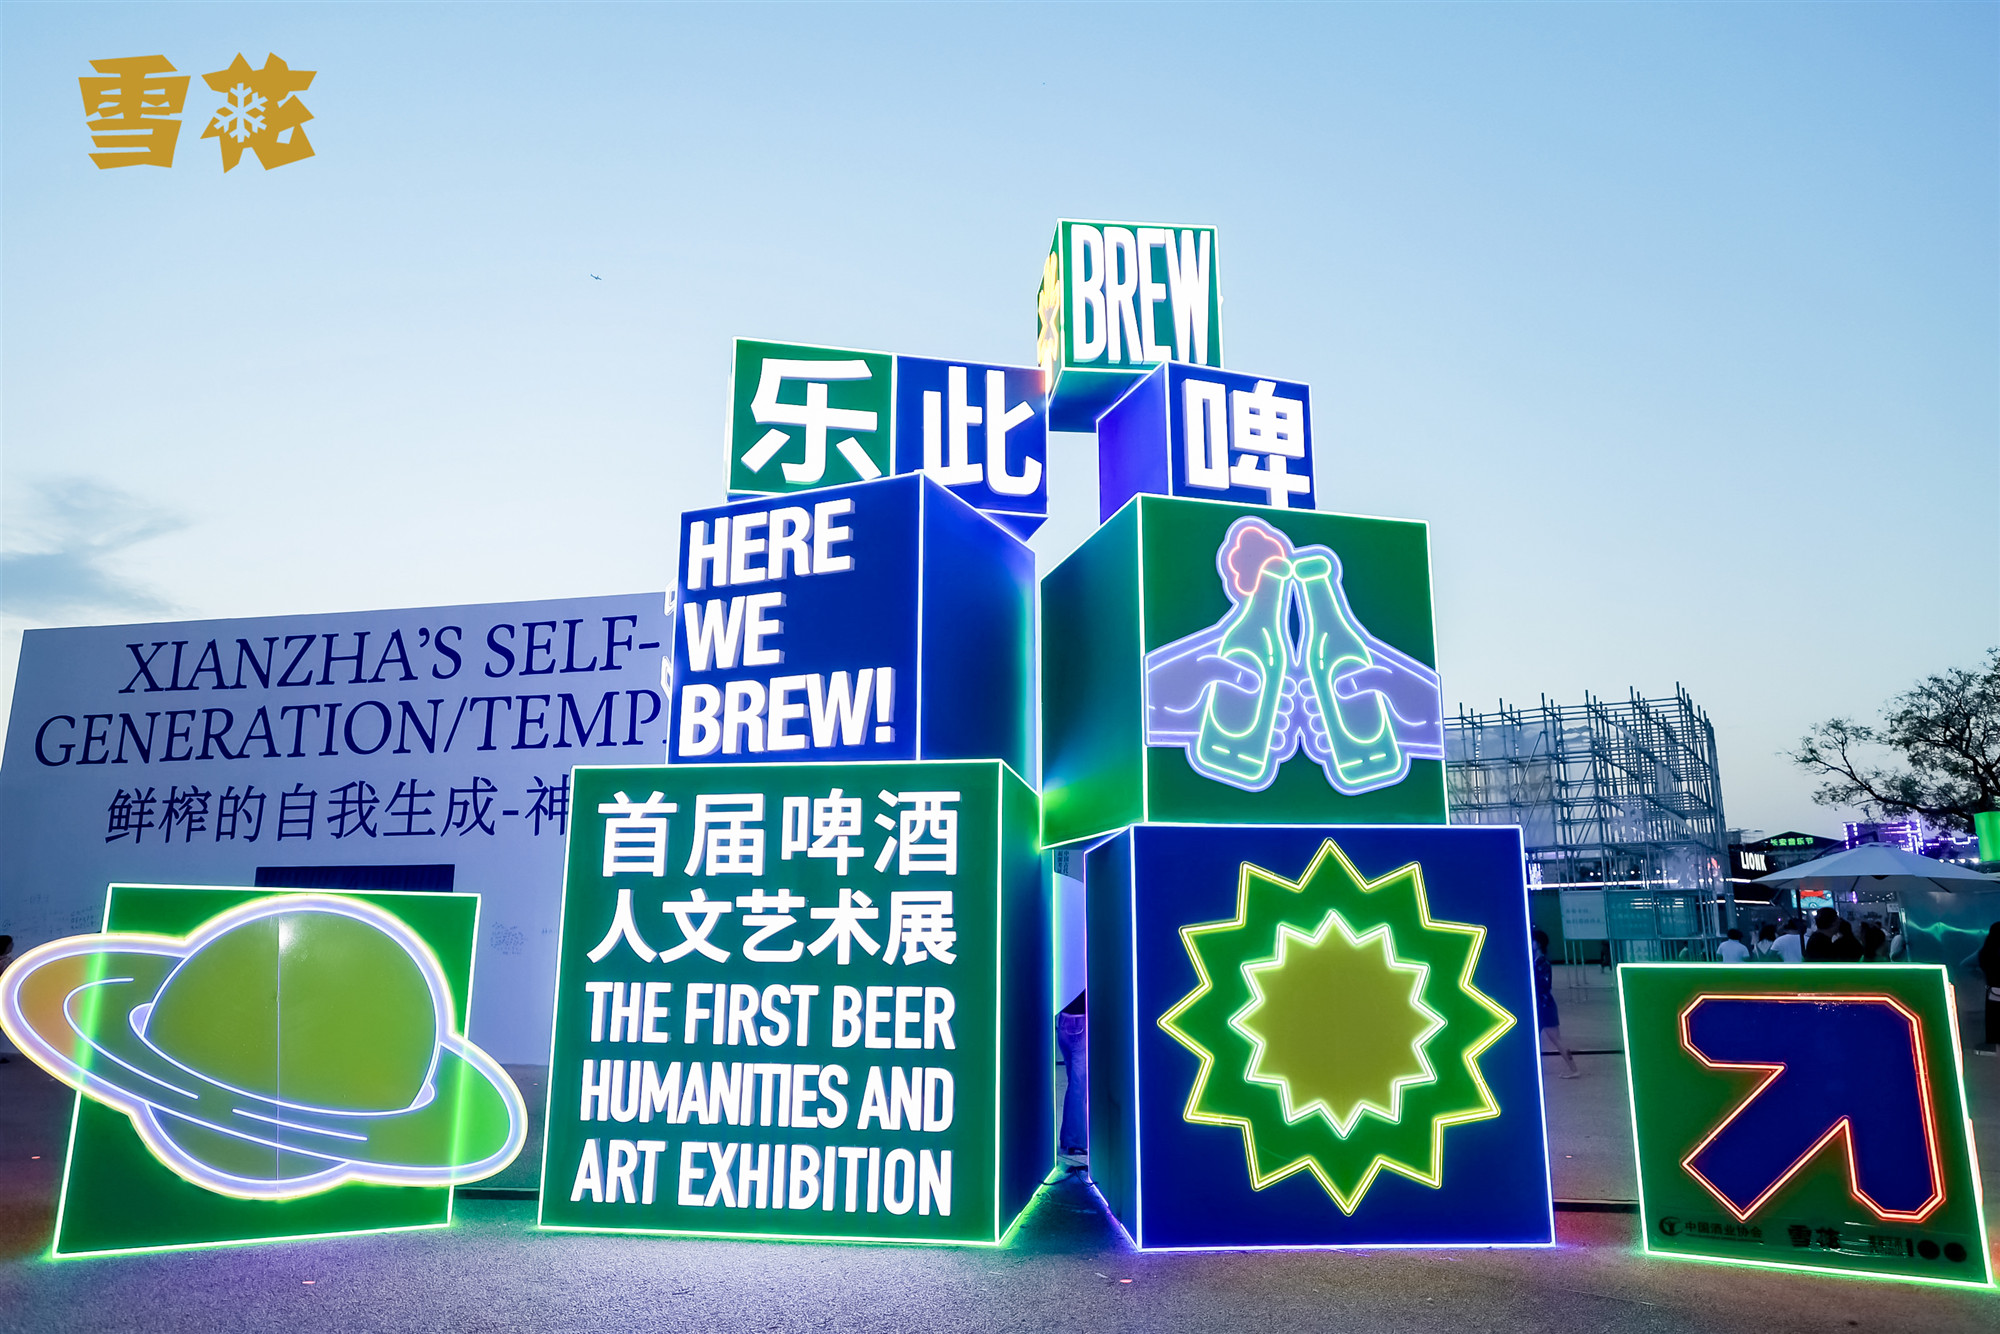 Made for young  華潤雪花西安首辦啤酒人文藝術展「樂此BREW啤」沖上熱搜